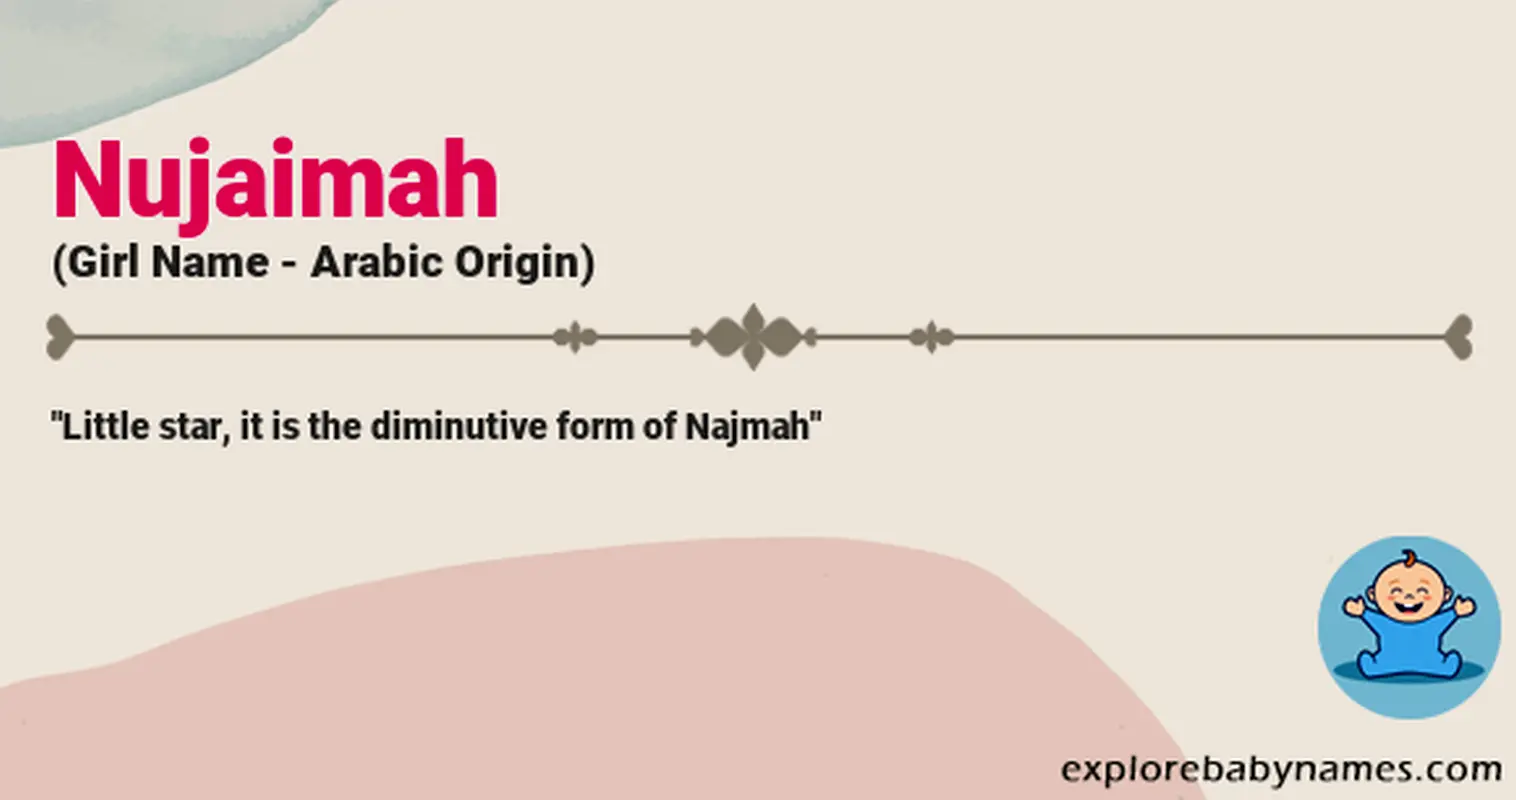 Meaning of Nujaimah